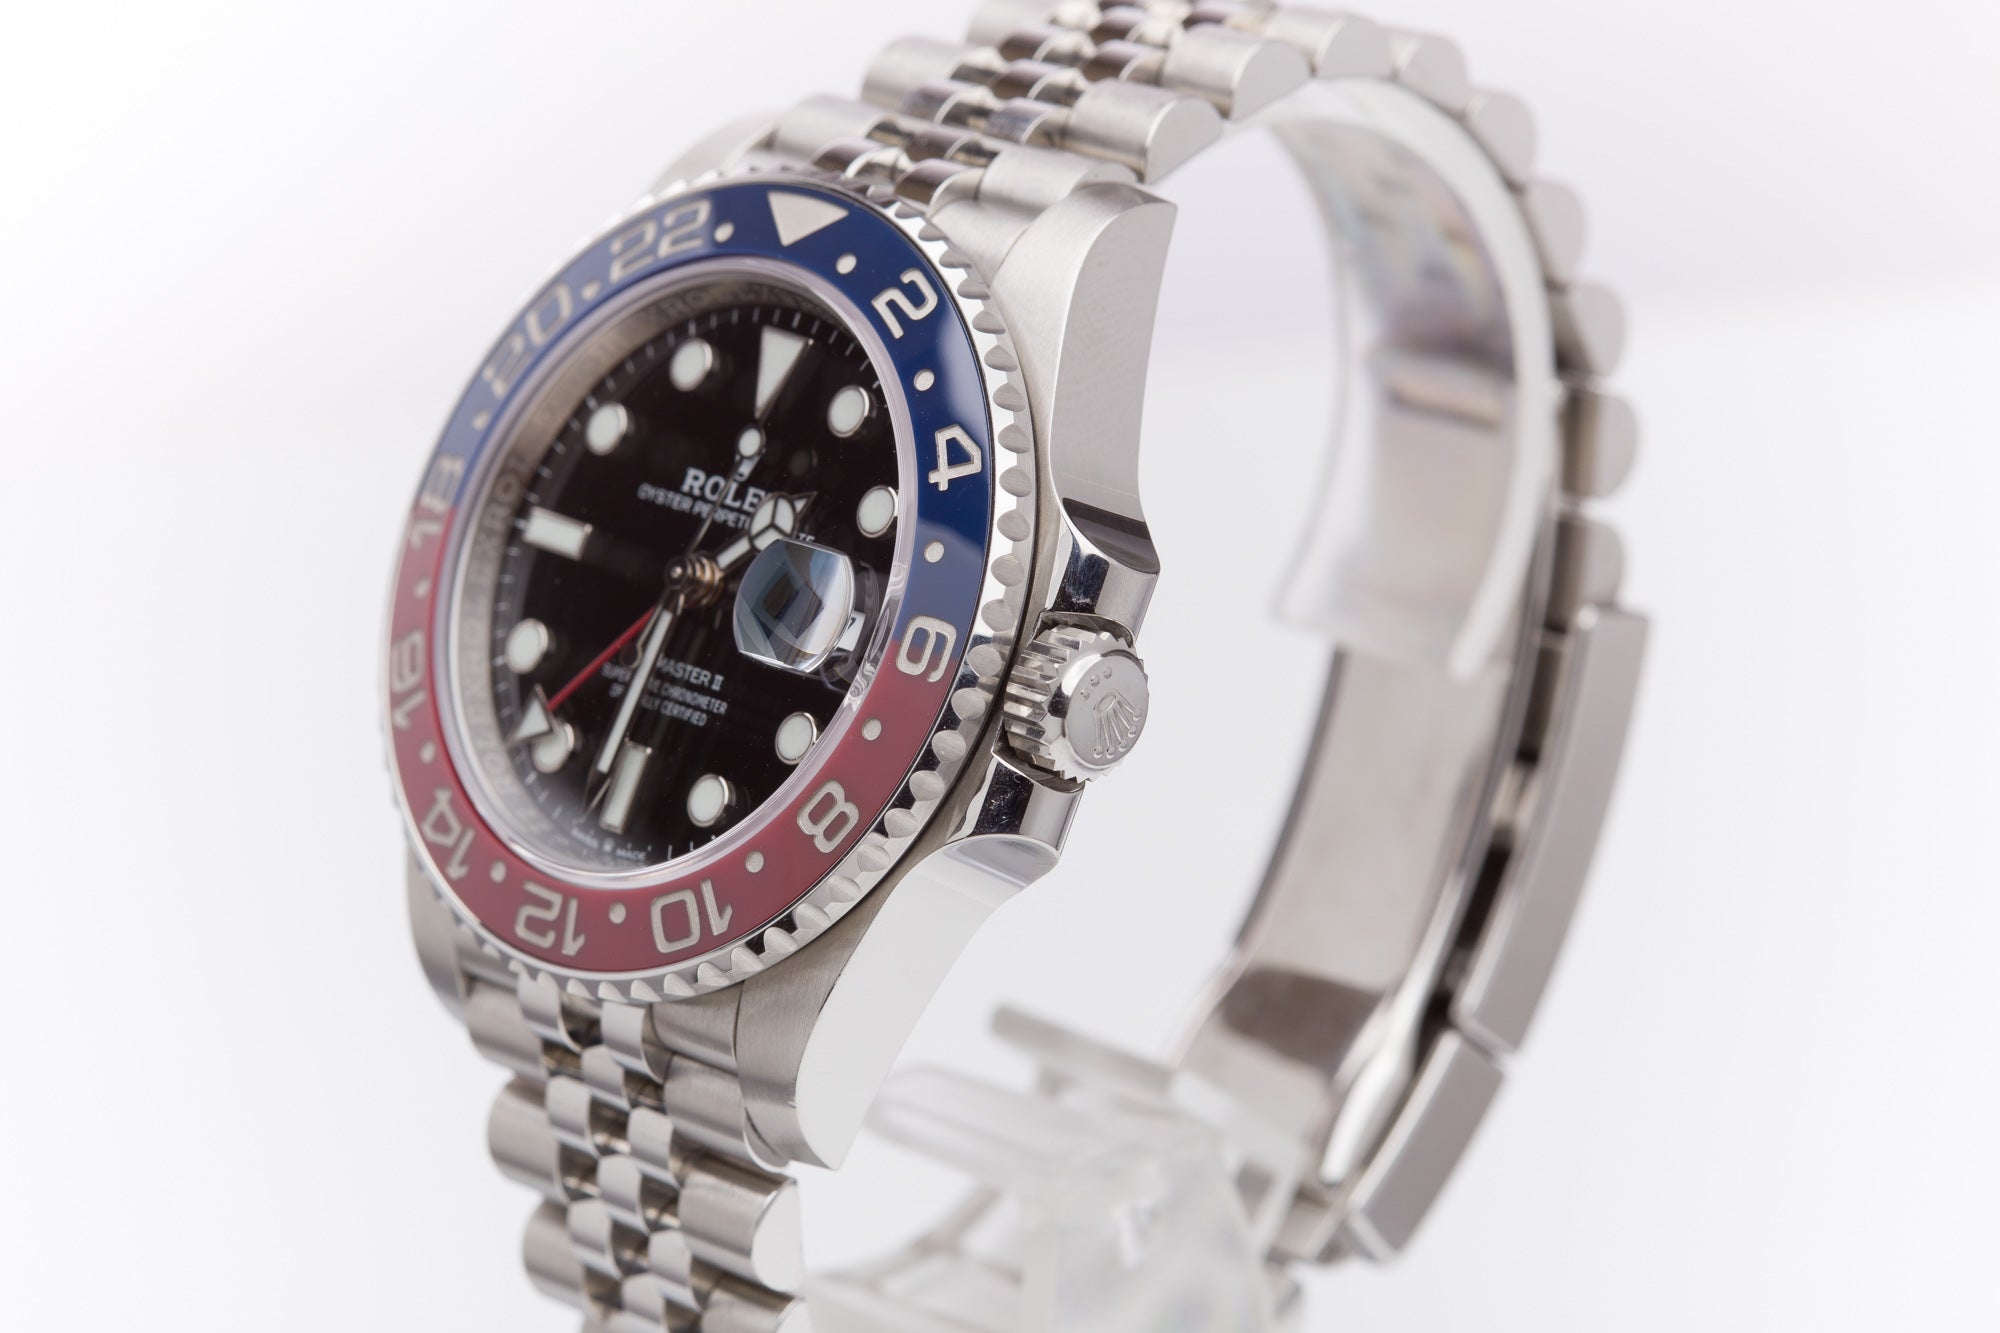 Horn begå parallel HQ Milton - 2018 Rolex GMT-Master II 126710BLRO "Pepsi" with Box & Card,  Inventory #A4901, For Sale